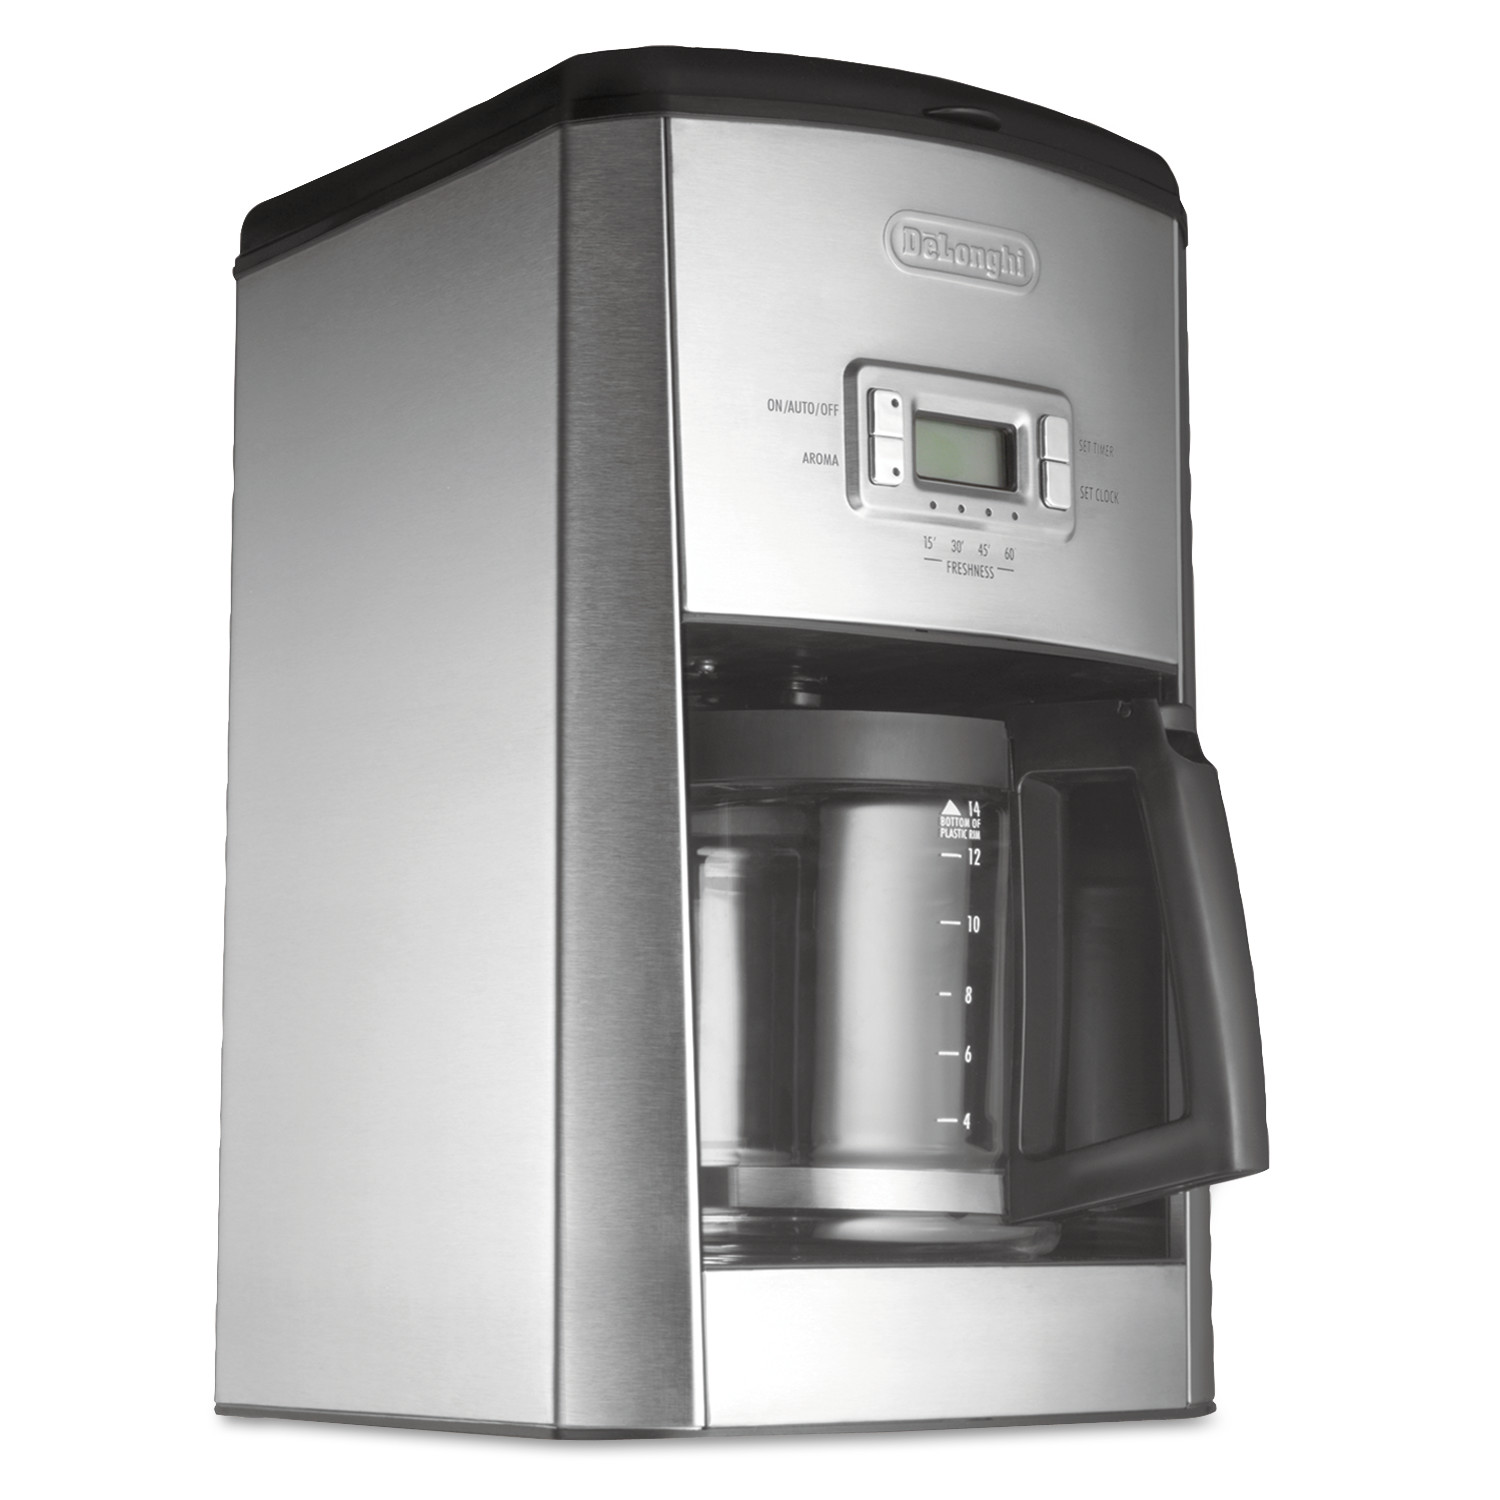 DeLONGHI DC514T 14-Cup Drip Coffee Maker, Stainless Steel, Black/Silver - image 1 of 3